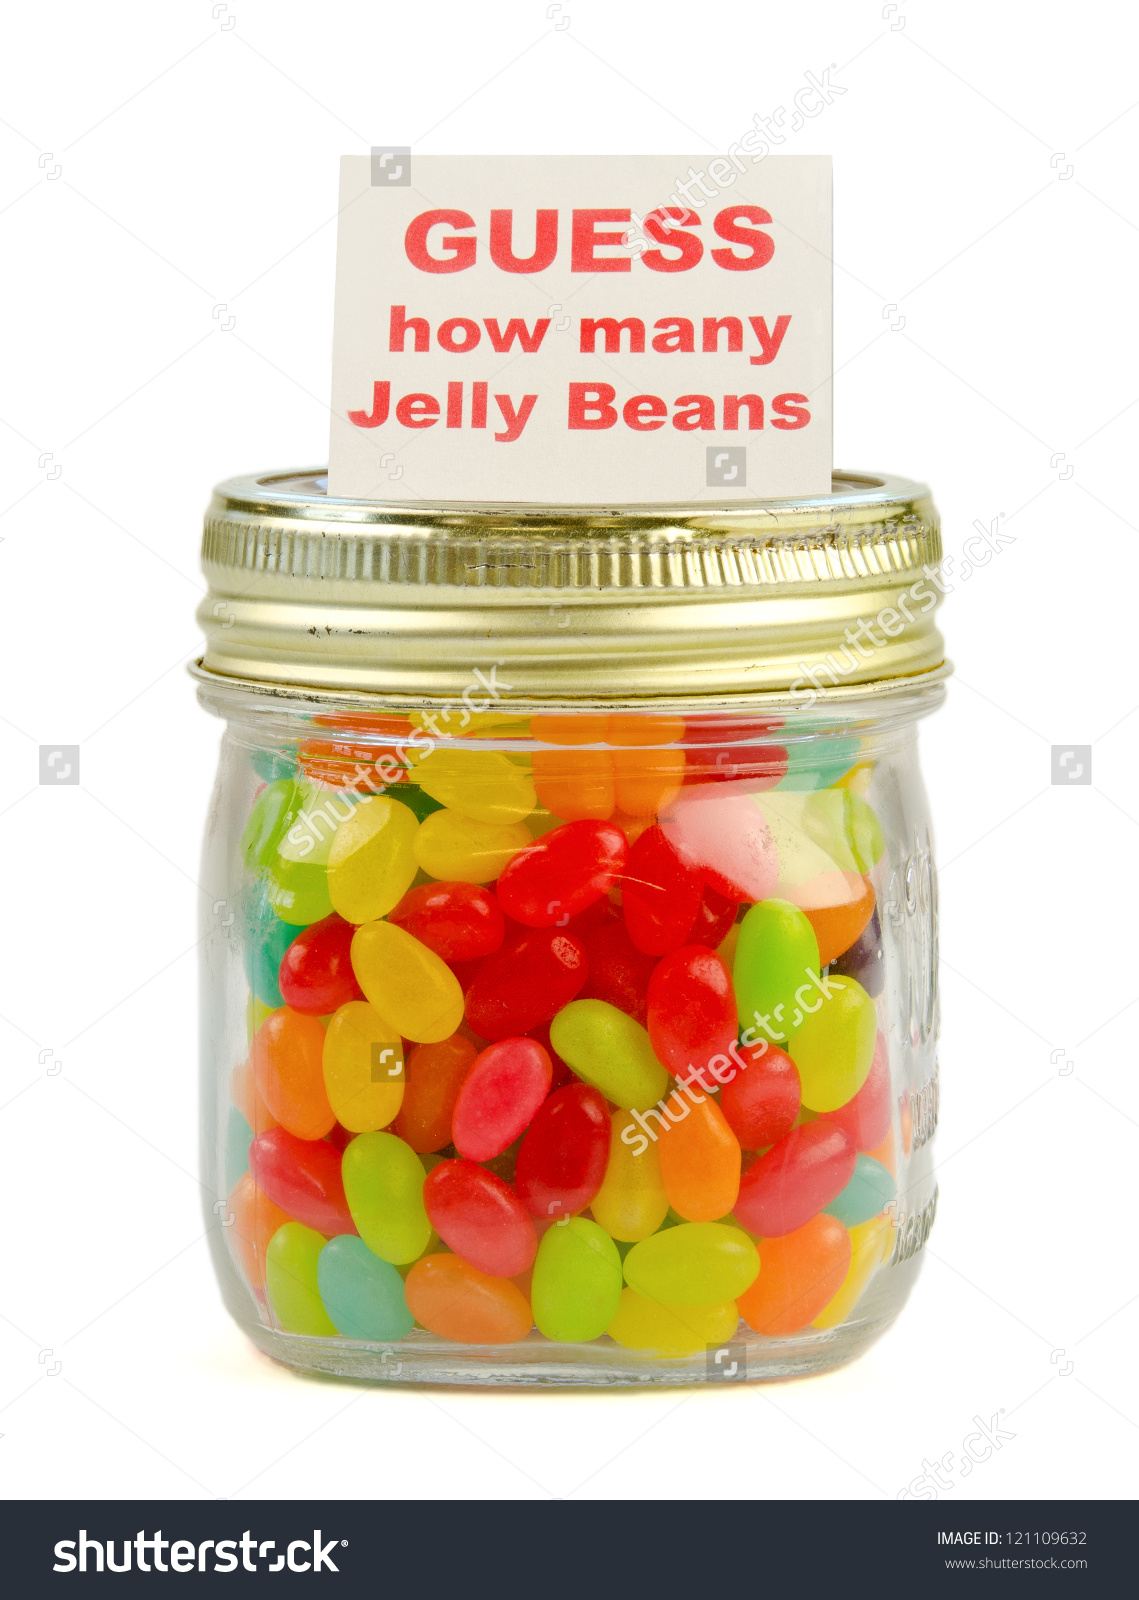 photo of a jar of beans